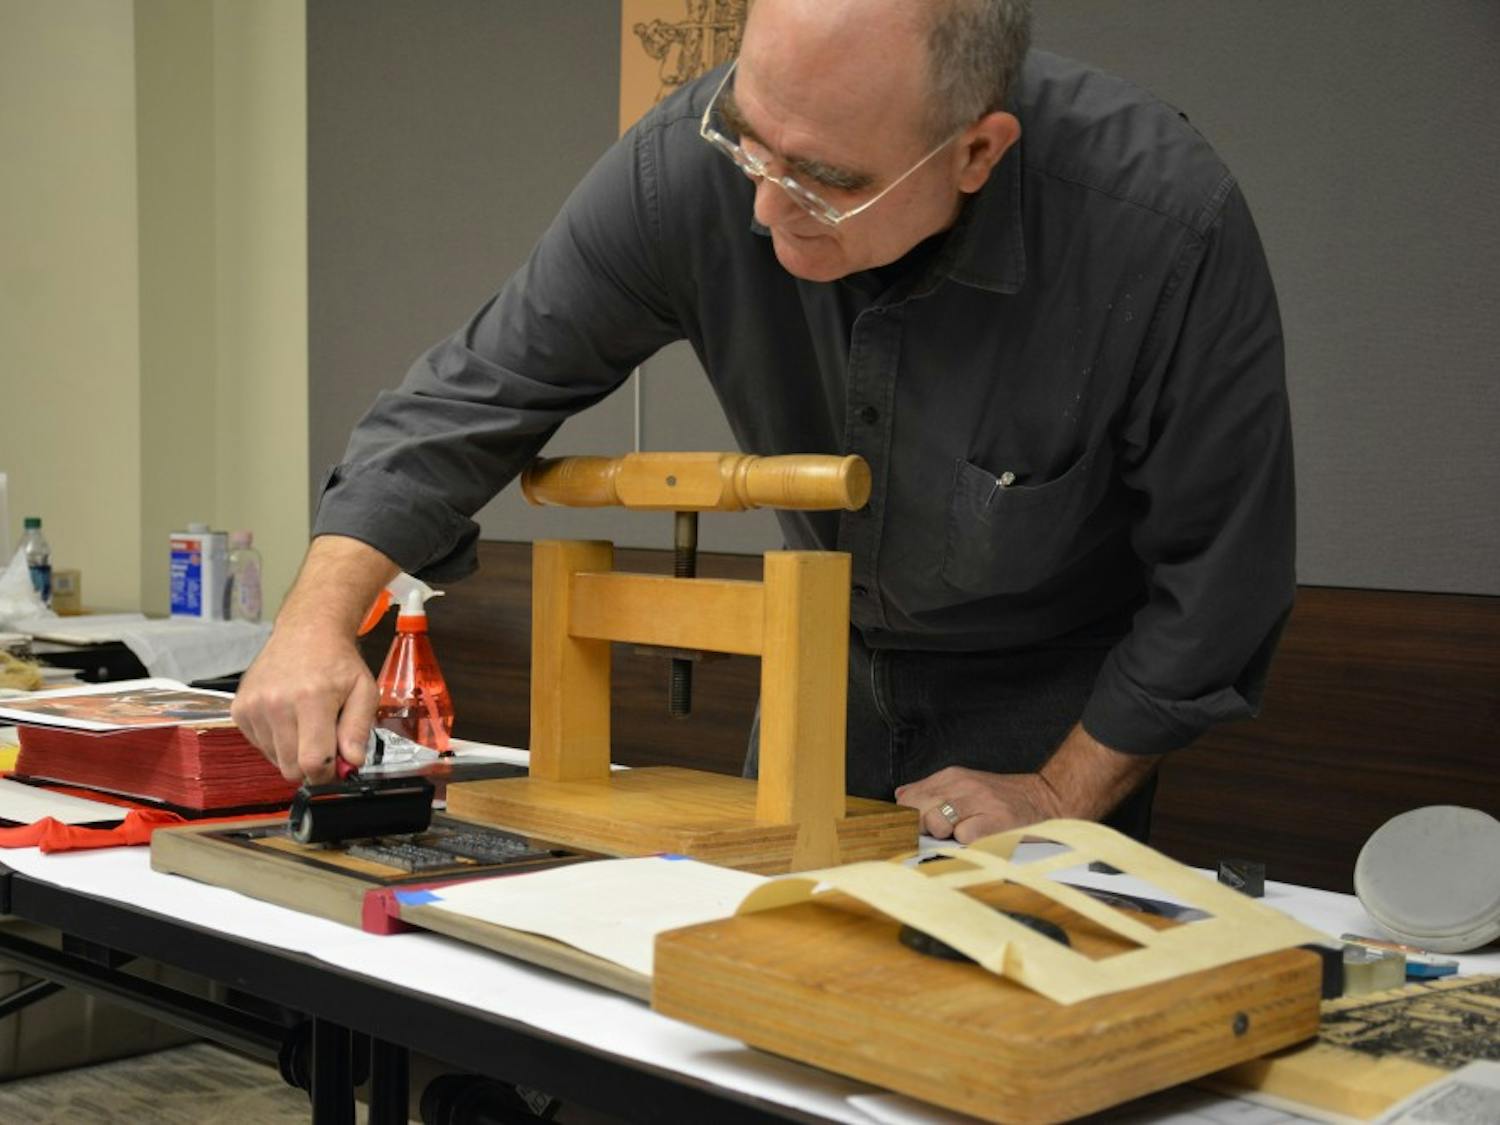 Josef Beery demonstrates how to use a platen press, made out of a repurposed flour press.&nbsp;